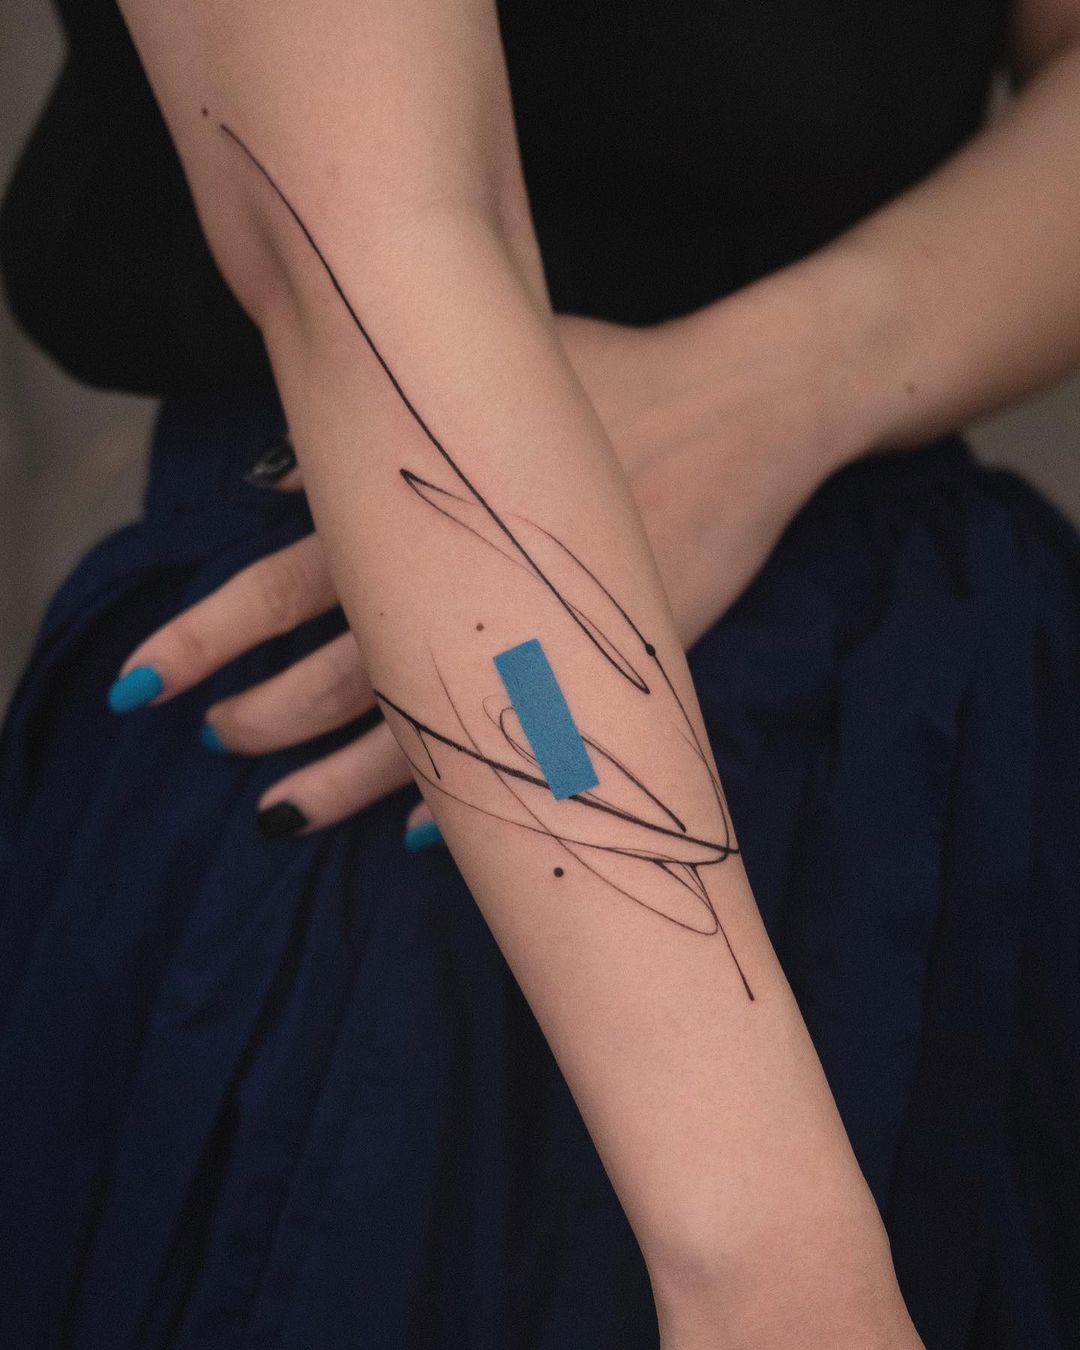 What tiny minimalist tattoo should I get? I've never had a tattoo before  and it will be over old self-harm scars if that makes a difference. - Quora